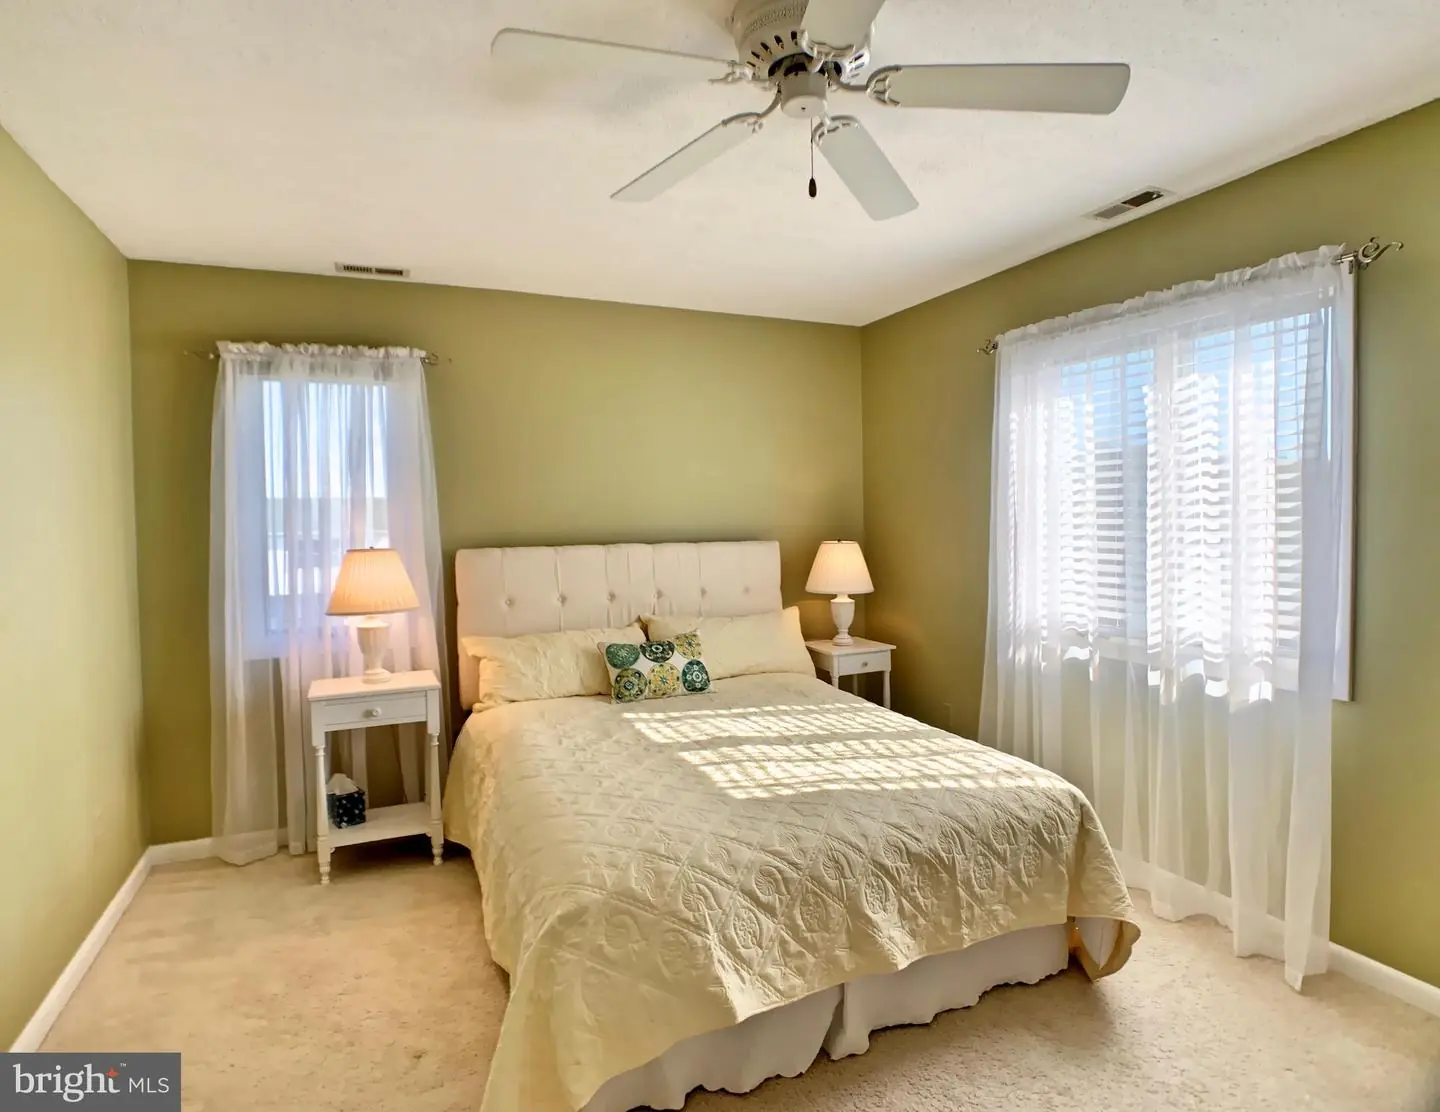 DESU164670-304207560317-2021-07-17-02-03-15 35199 Hassell Ave | Bethany Beach, DE Real Estate For Sale | MLS# Desu164670  - 1st Choice Properties